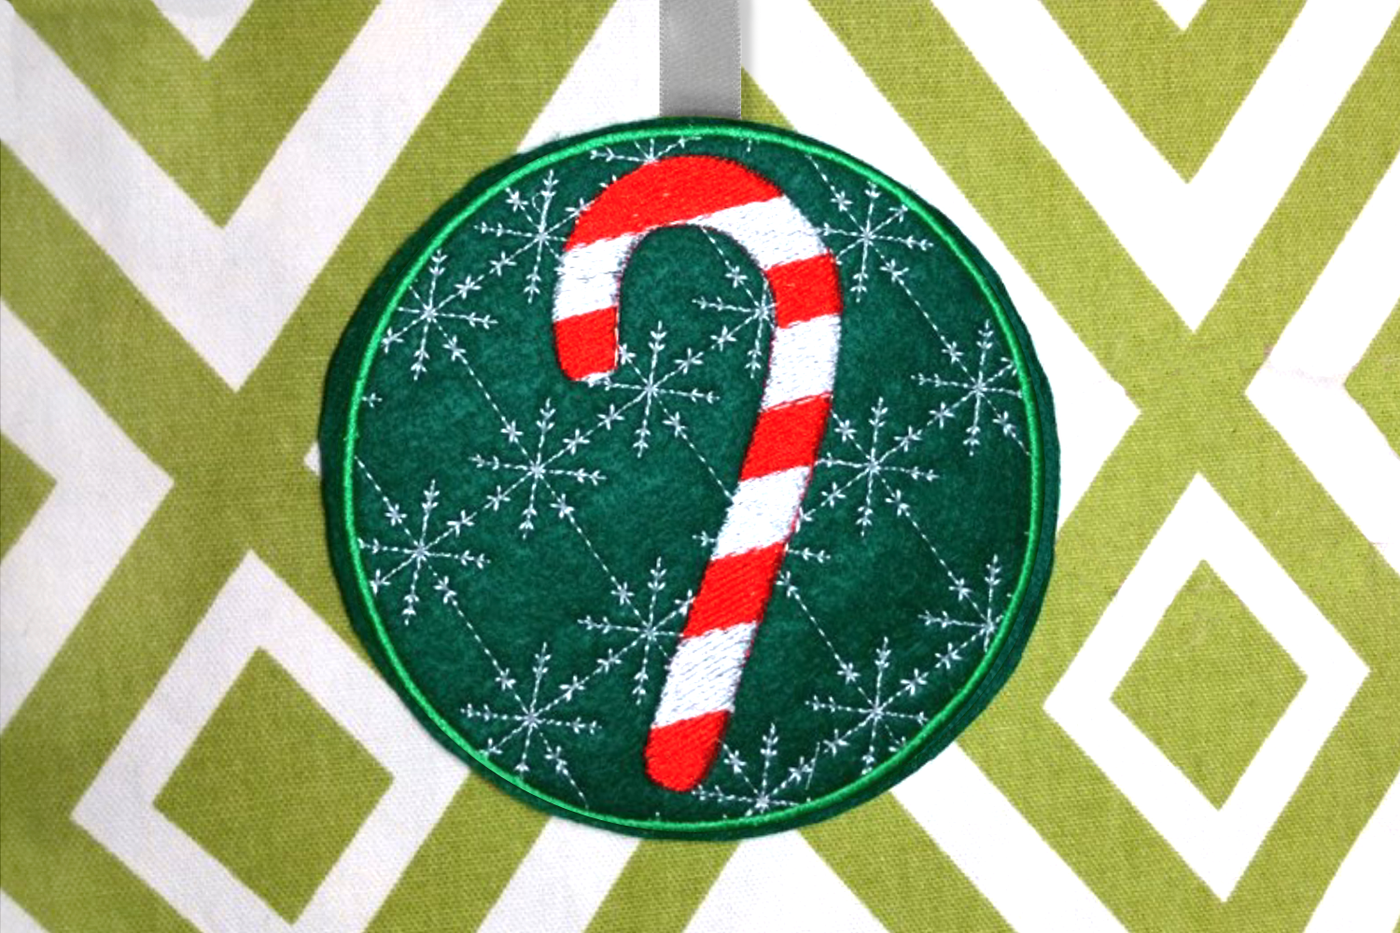 In the hoop Christmas ornament. A round green piece of felt has the embroidery design of a striped candy cane. In the background is an embroidered snowflake pattern, set inside of a circle. A ribbon has been added to the top.